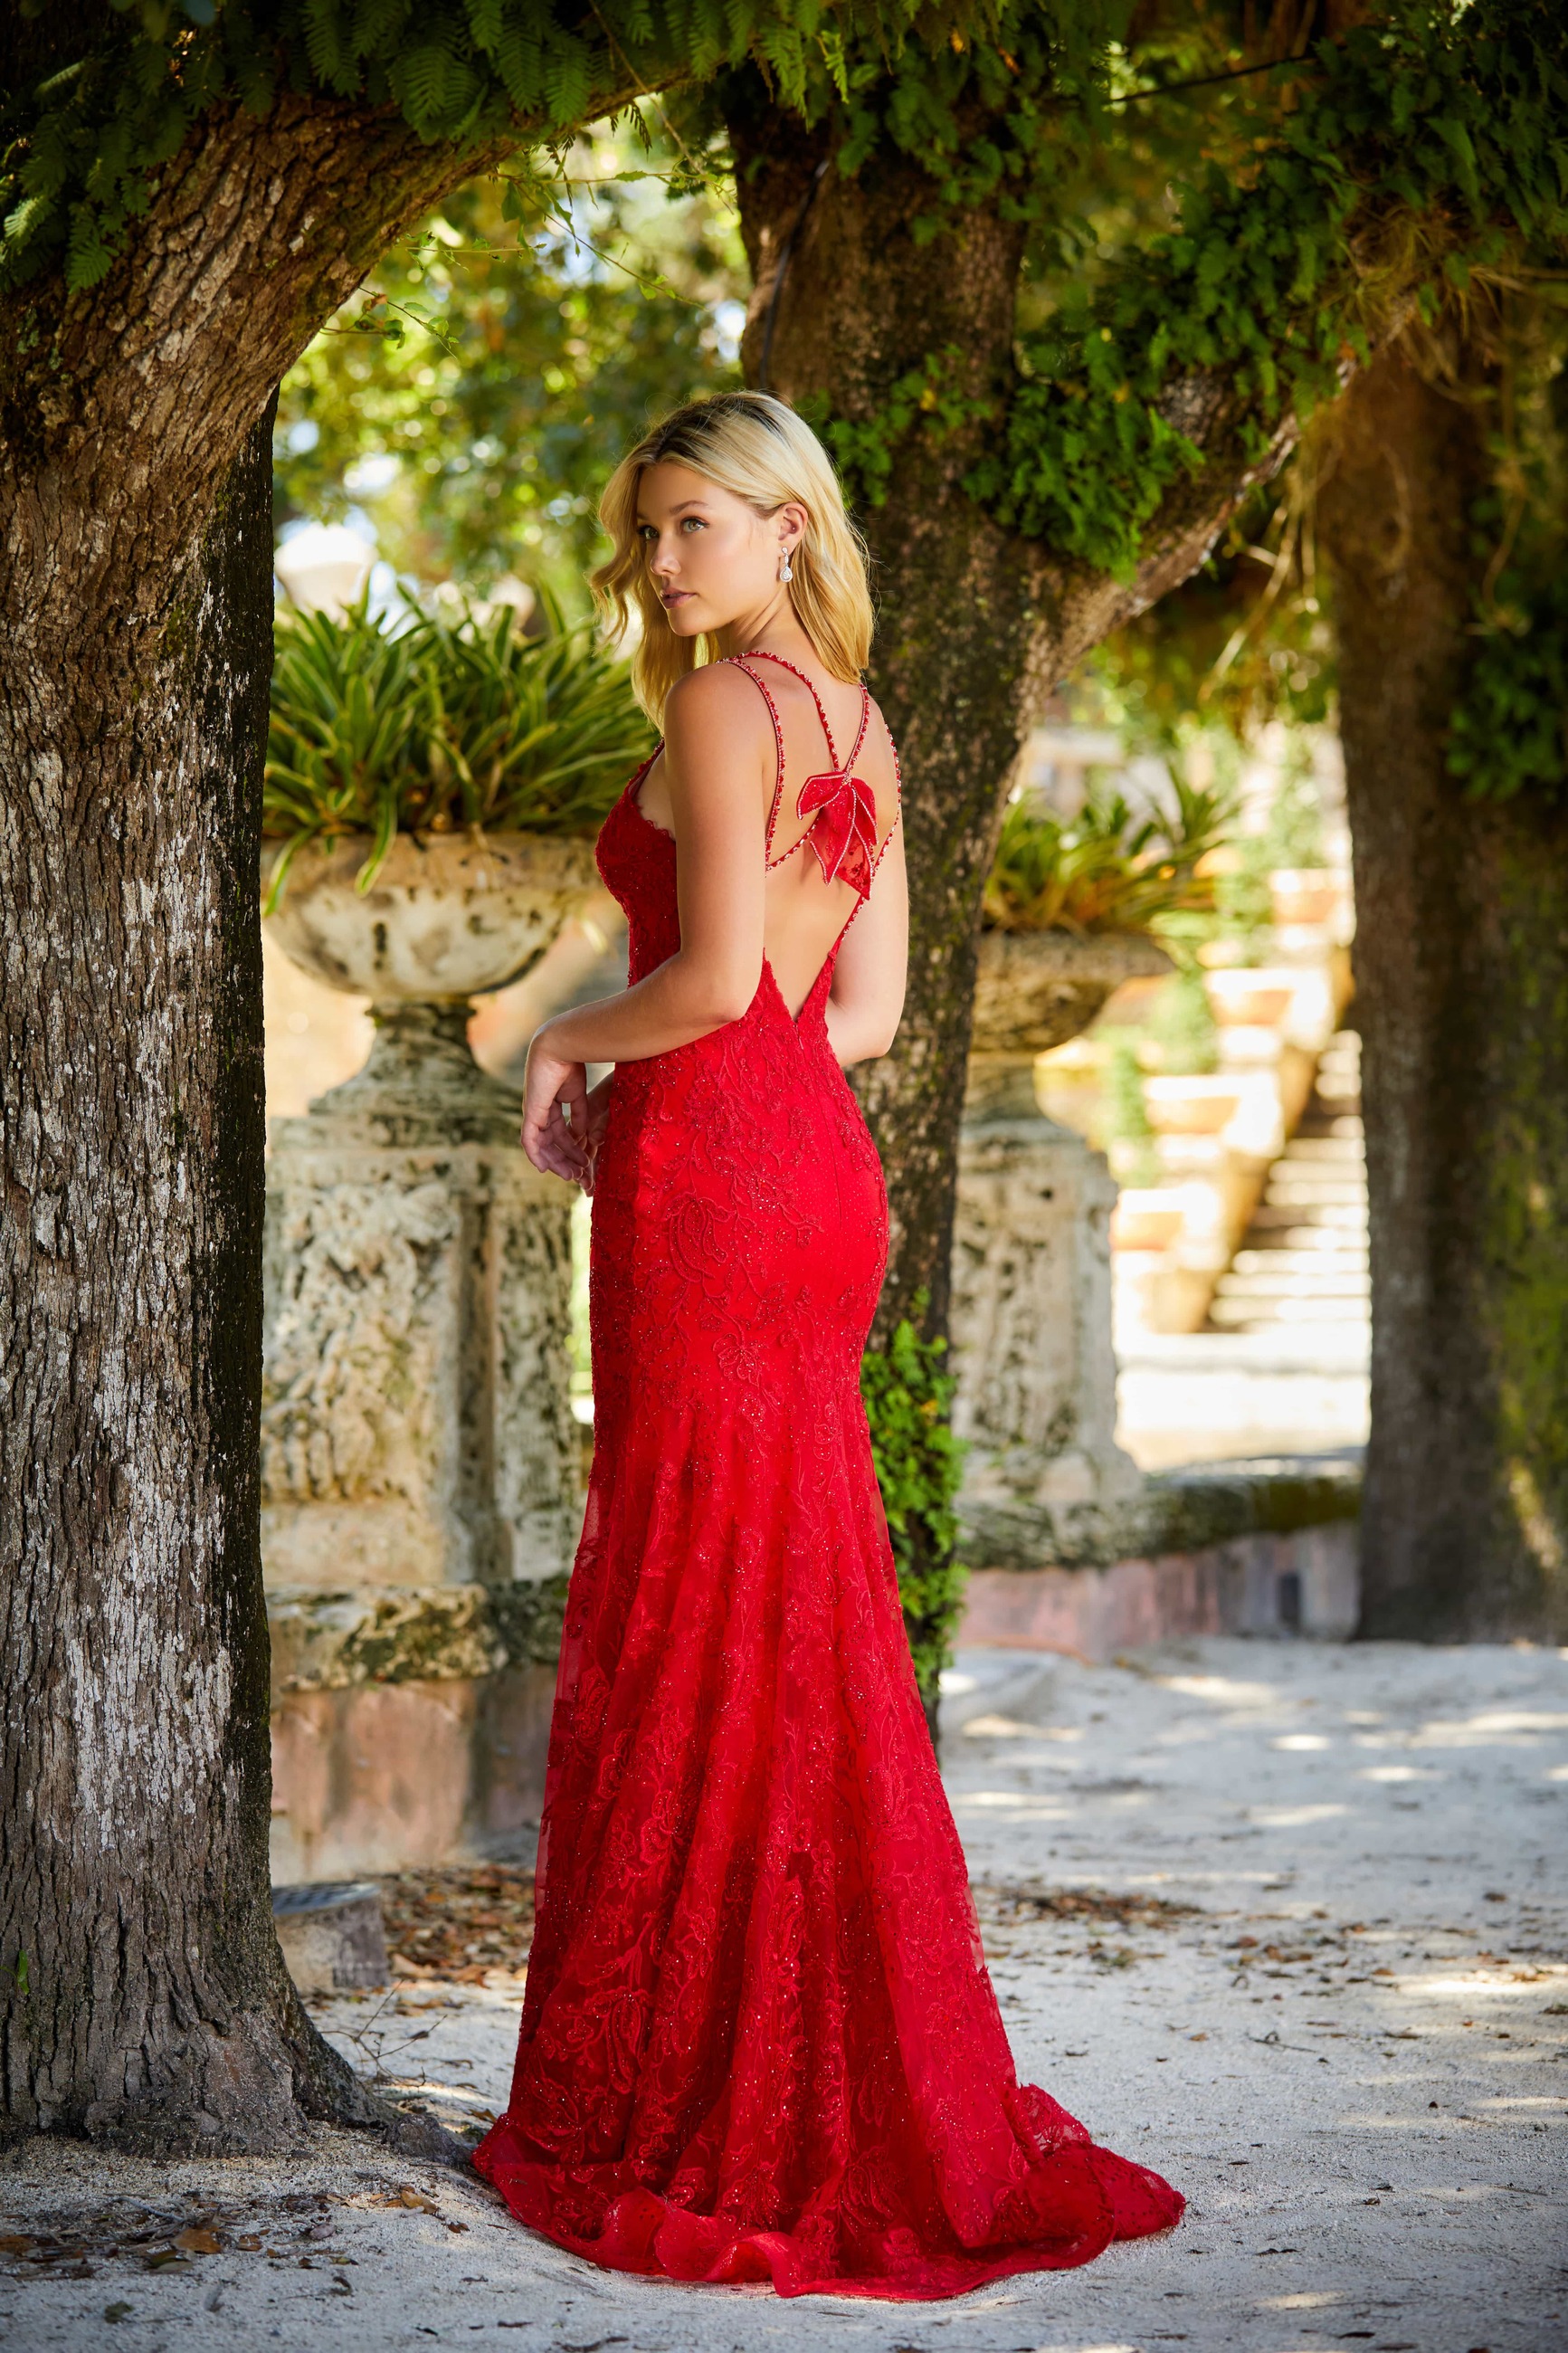 Blonde girl wearing long red dress with open back. Backface